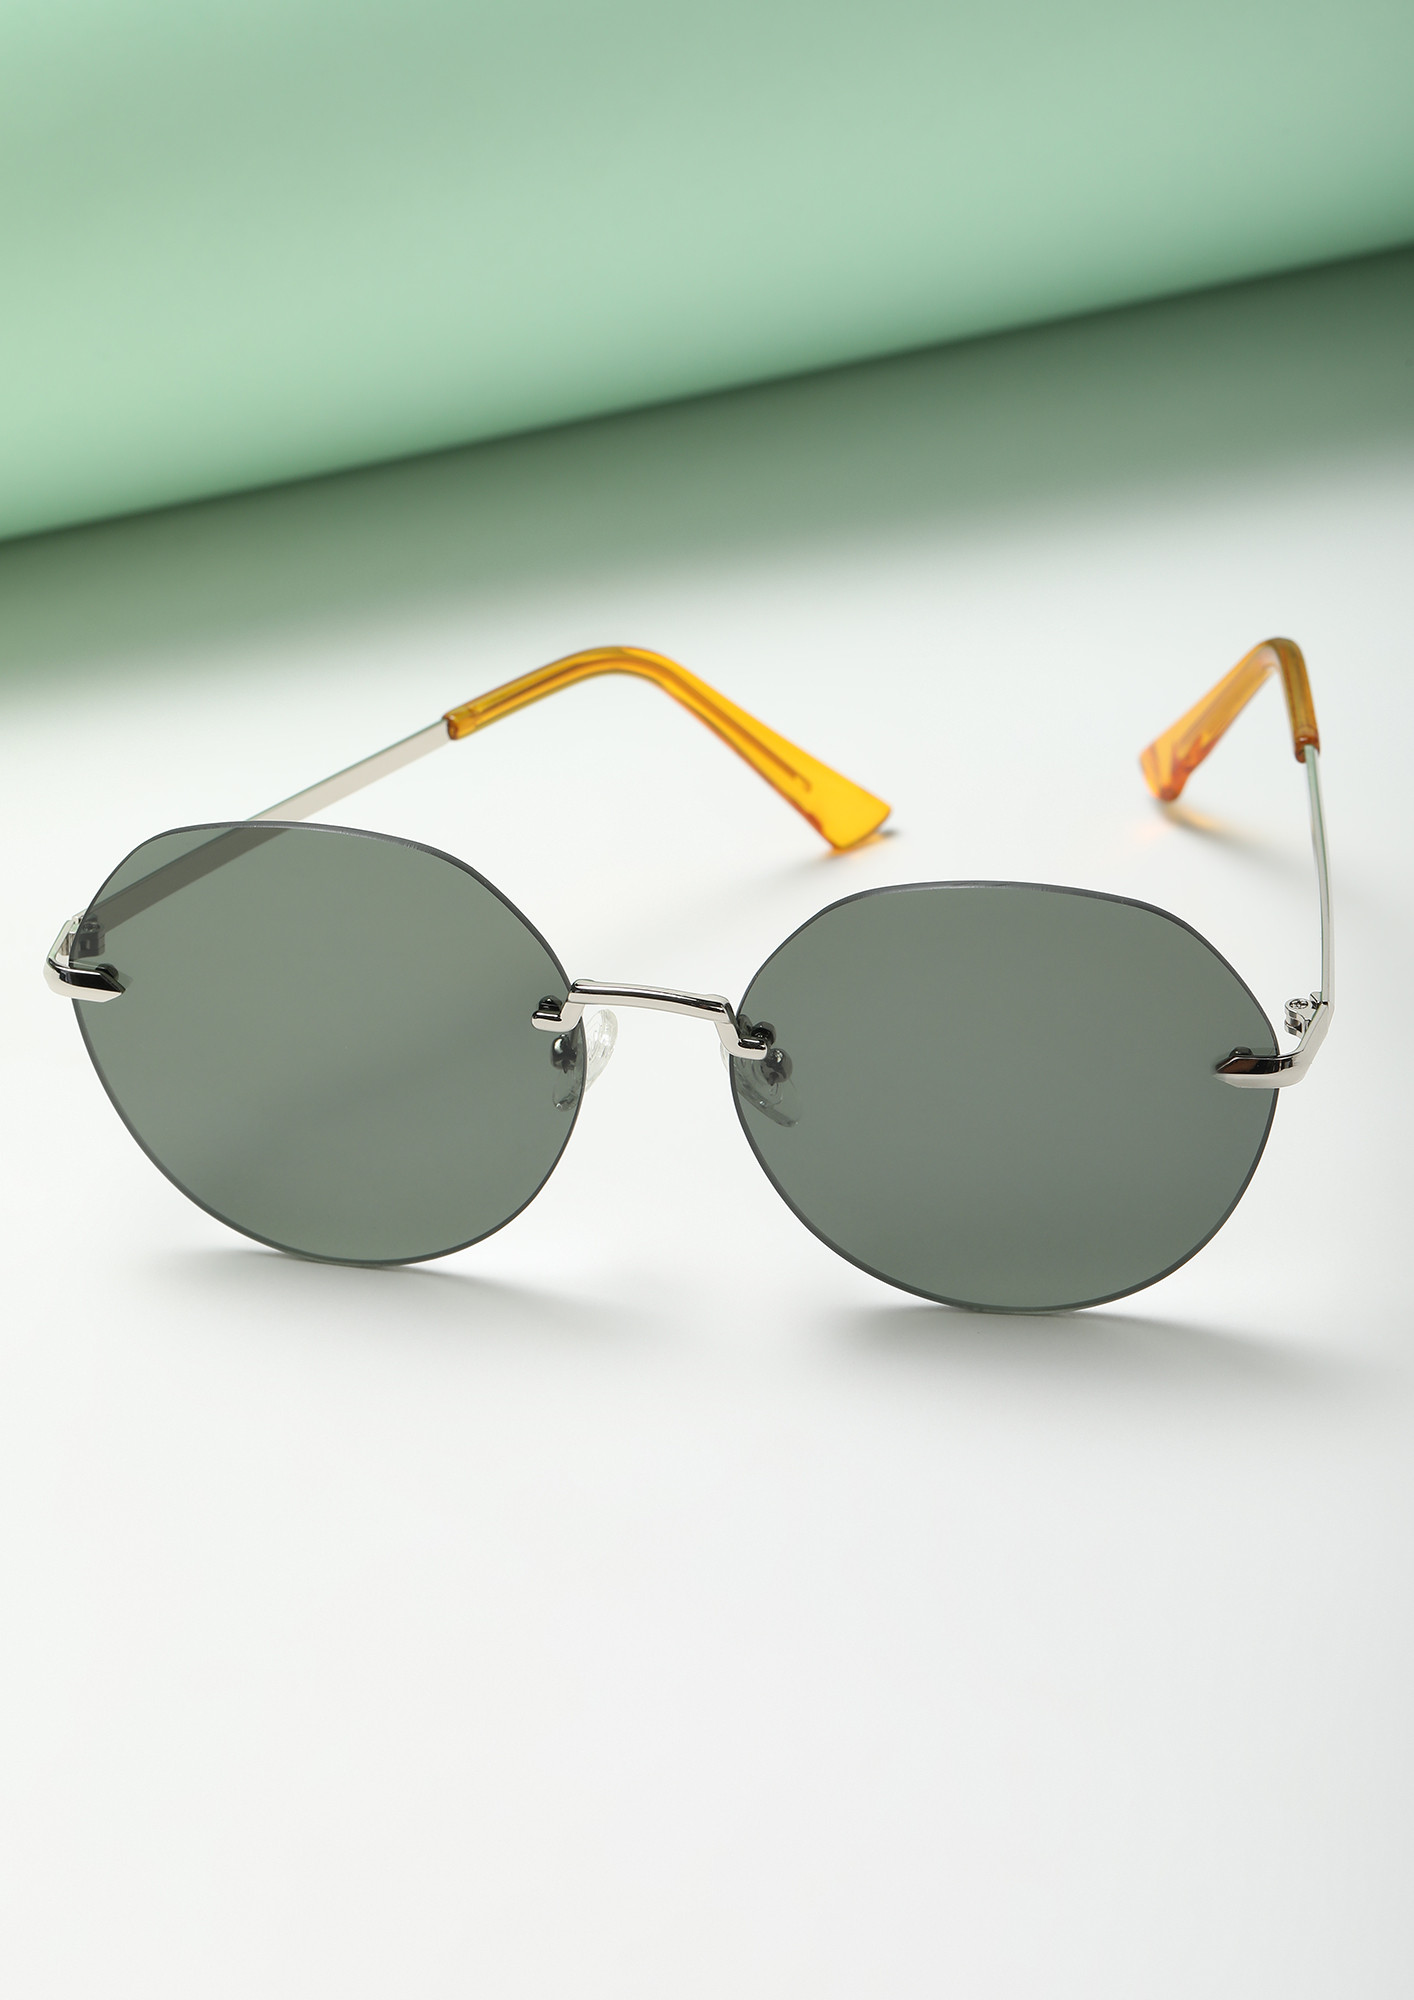 IN THE HOOD GREY ROUND SUNGLASSES